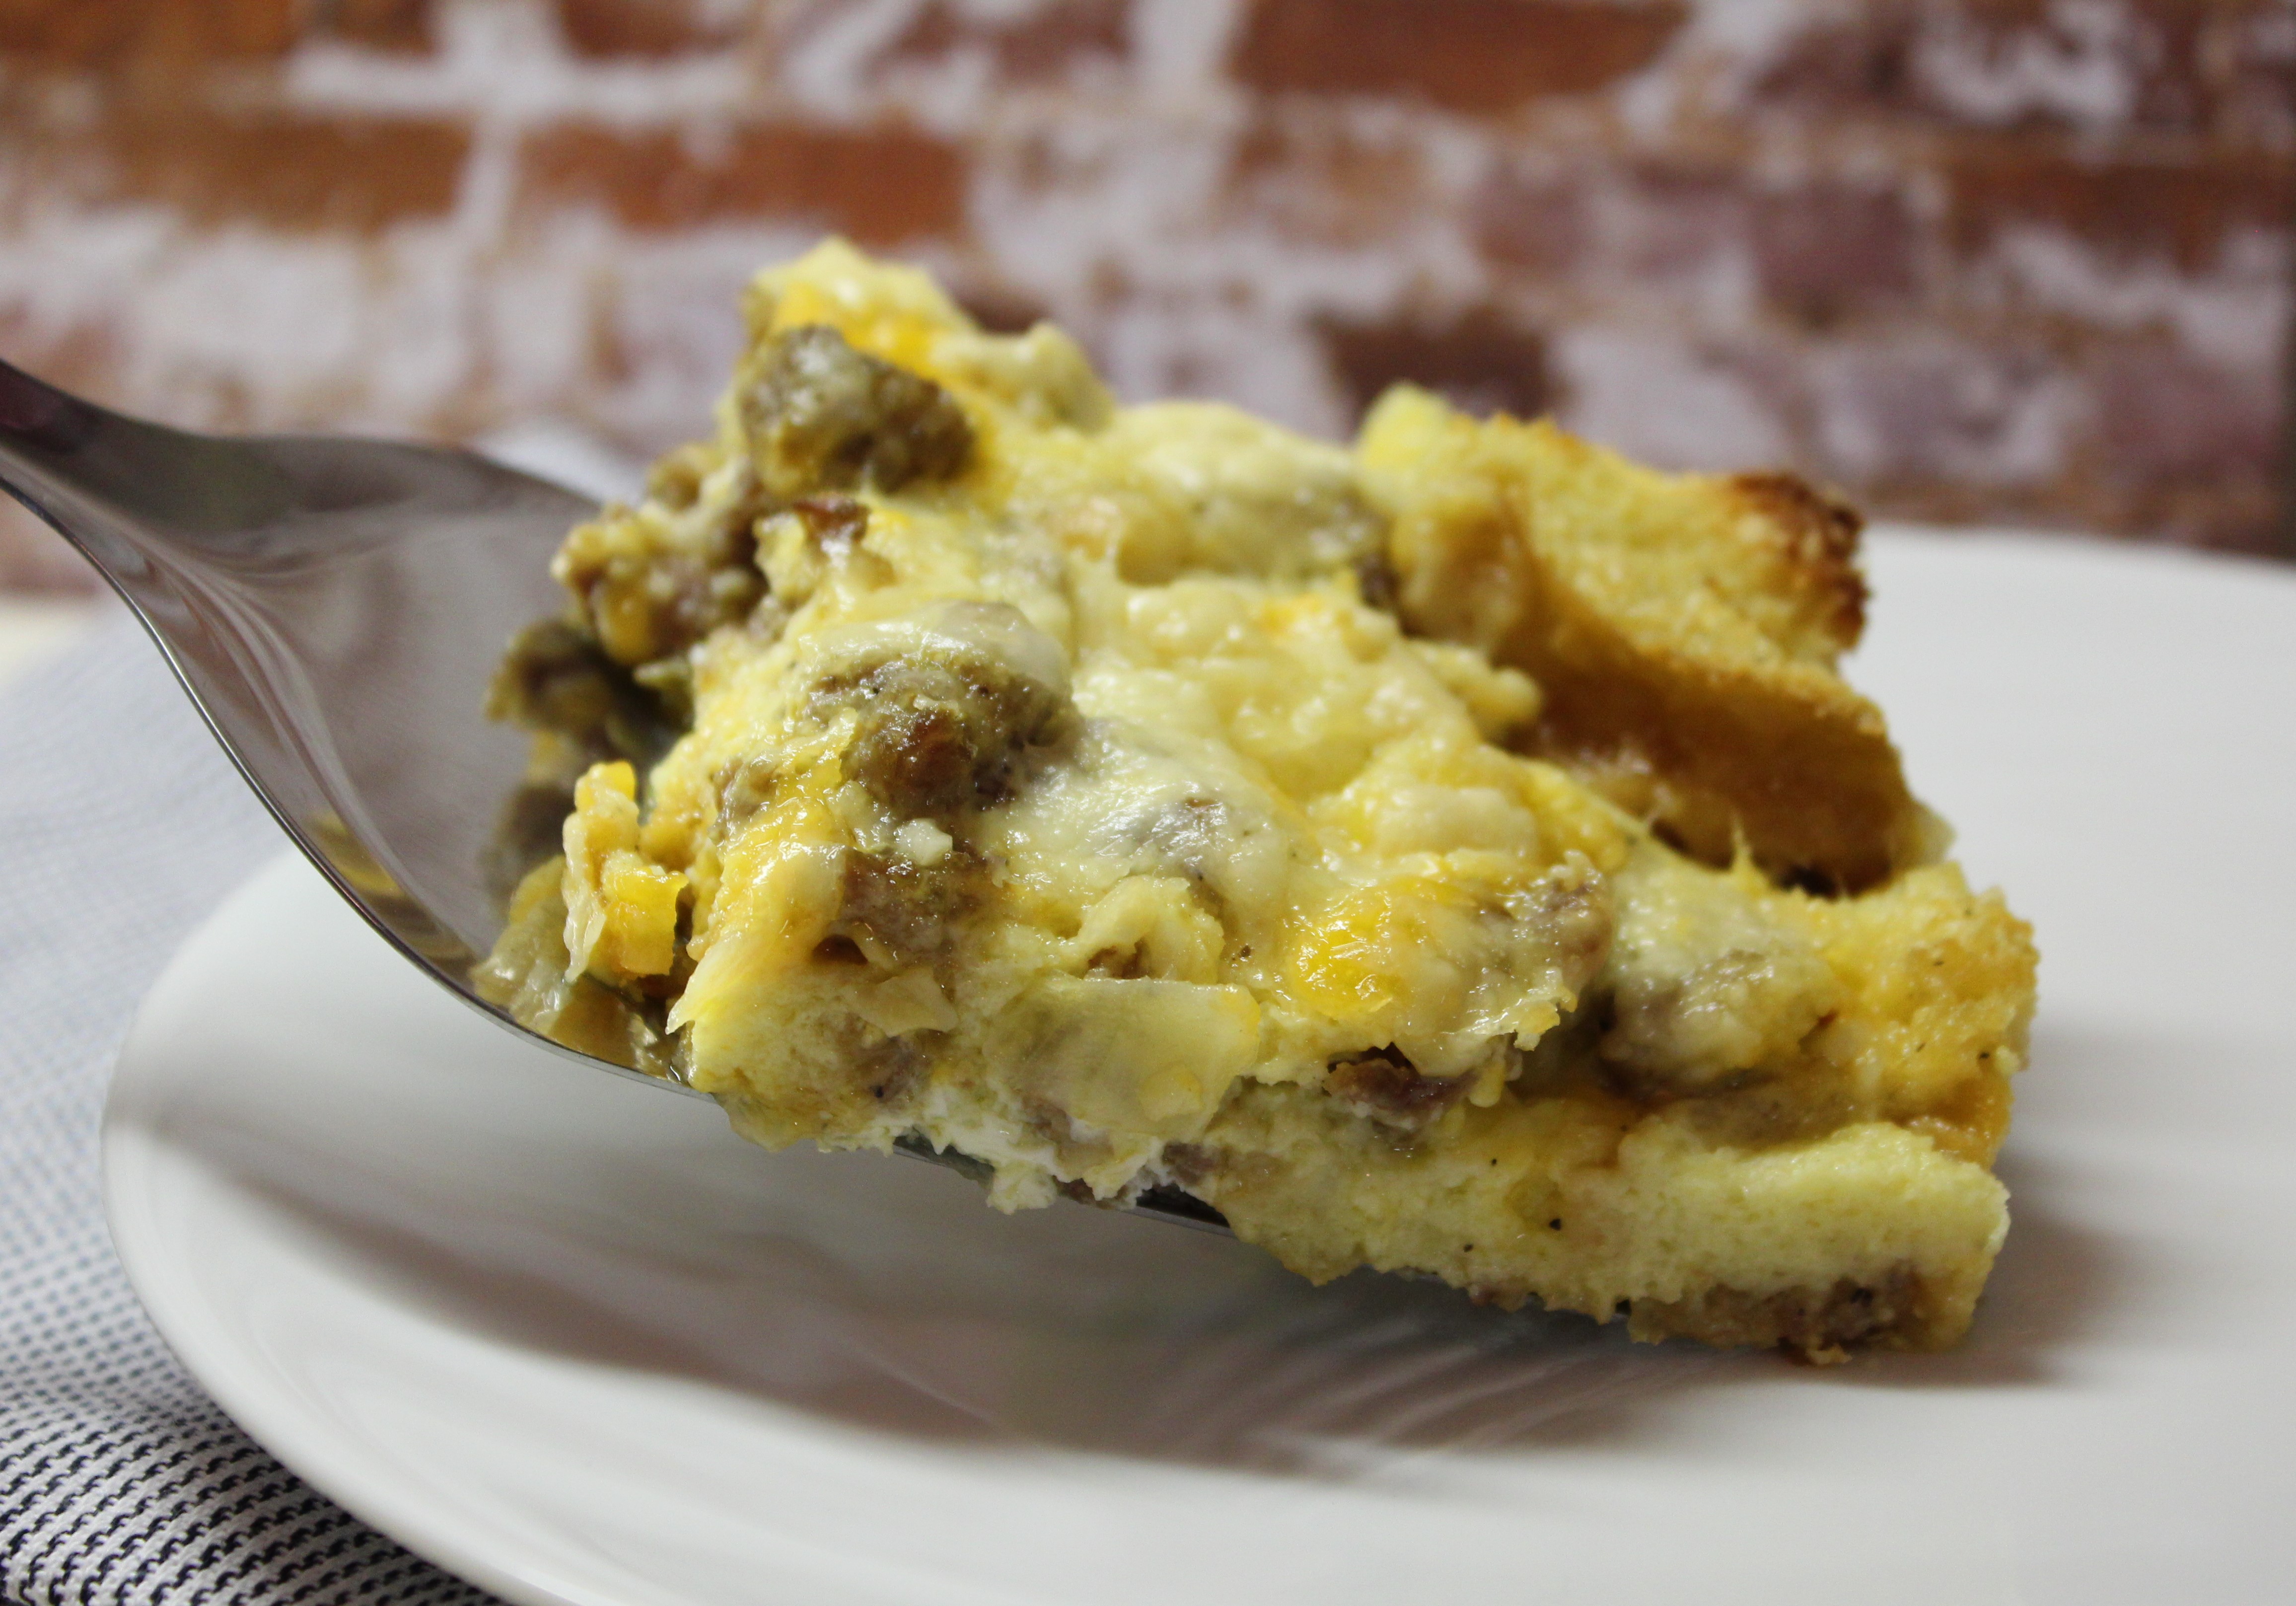 Rustic Sausage and Egg Casserole